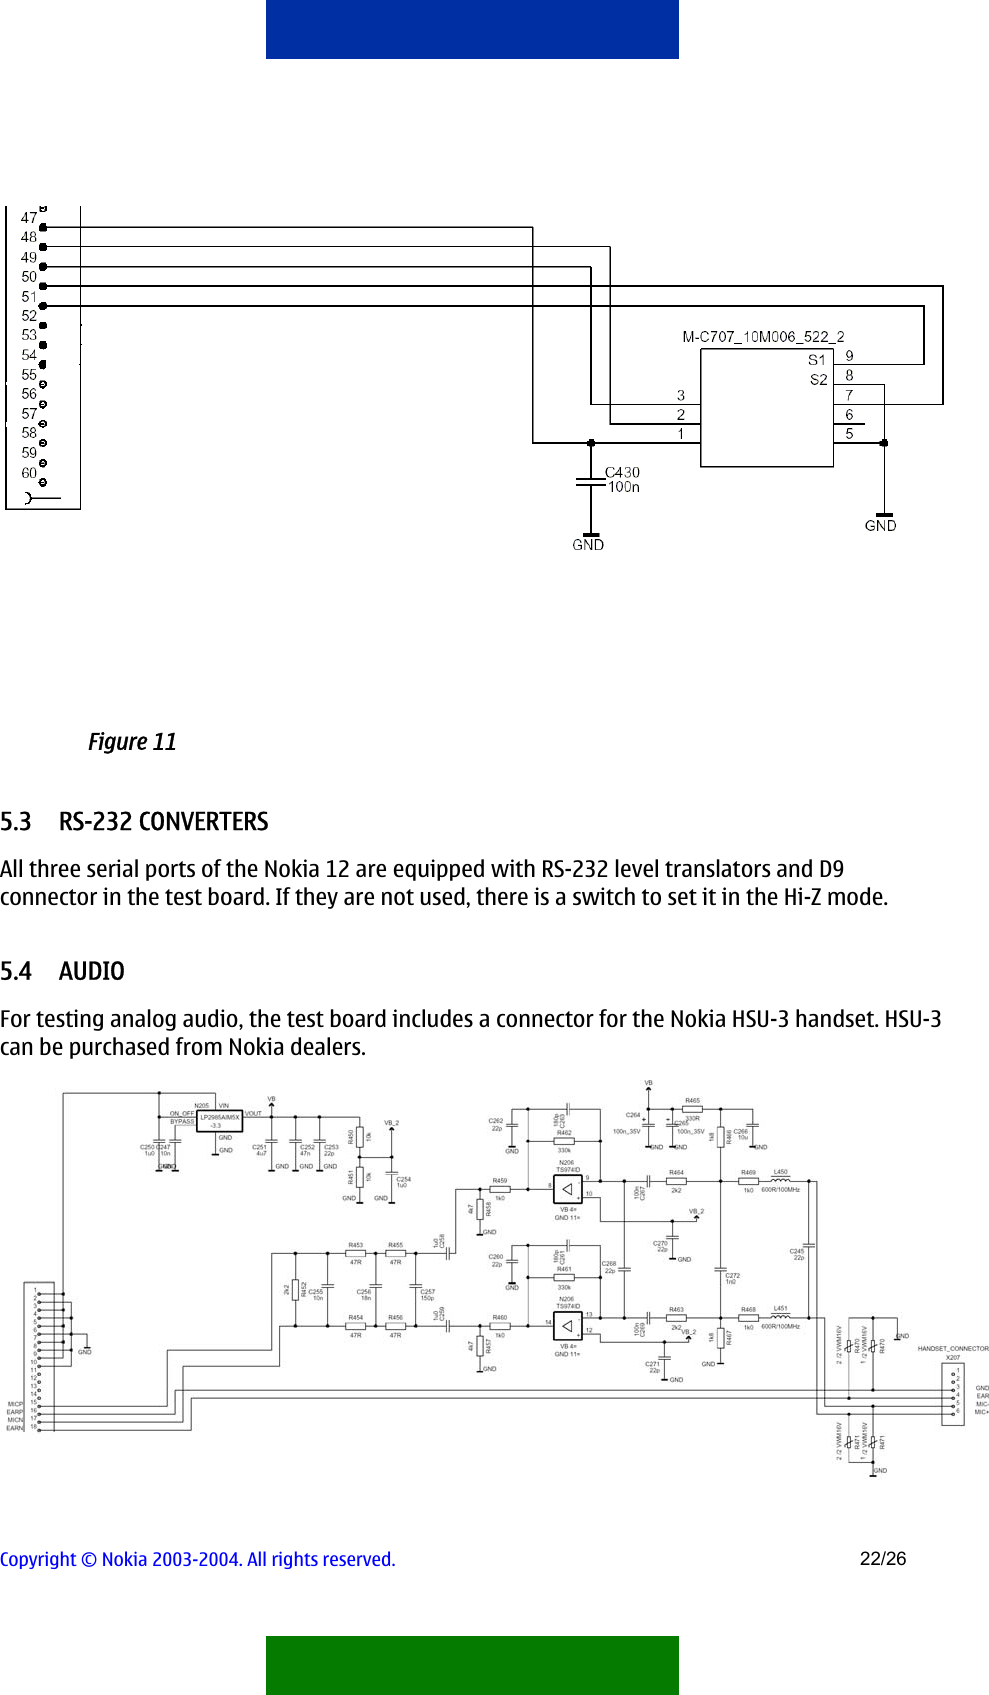   Figure 11 5.3 RS-232 CONVERTERS All three serial ports of the Nokia 12 are equipped with RS-232 level translators and D9 connector in the test board. If they are not used, there is a switch to set it in the Hi-Z mode. 5.4 AUDIO For testing analog audio, the test board includes a connector for the Nokia HSU-3 handset. HSU-3 can be purchased from Nokia dealers.   Copyright © Nokia 2003-2004. All rights reserved.   22/26  